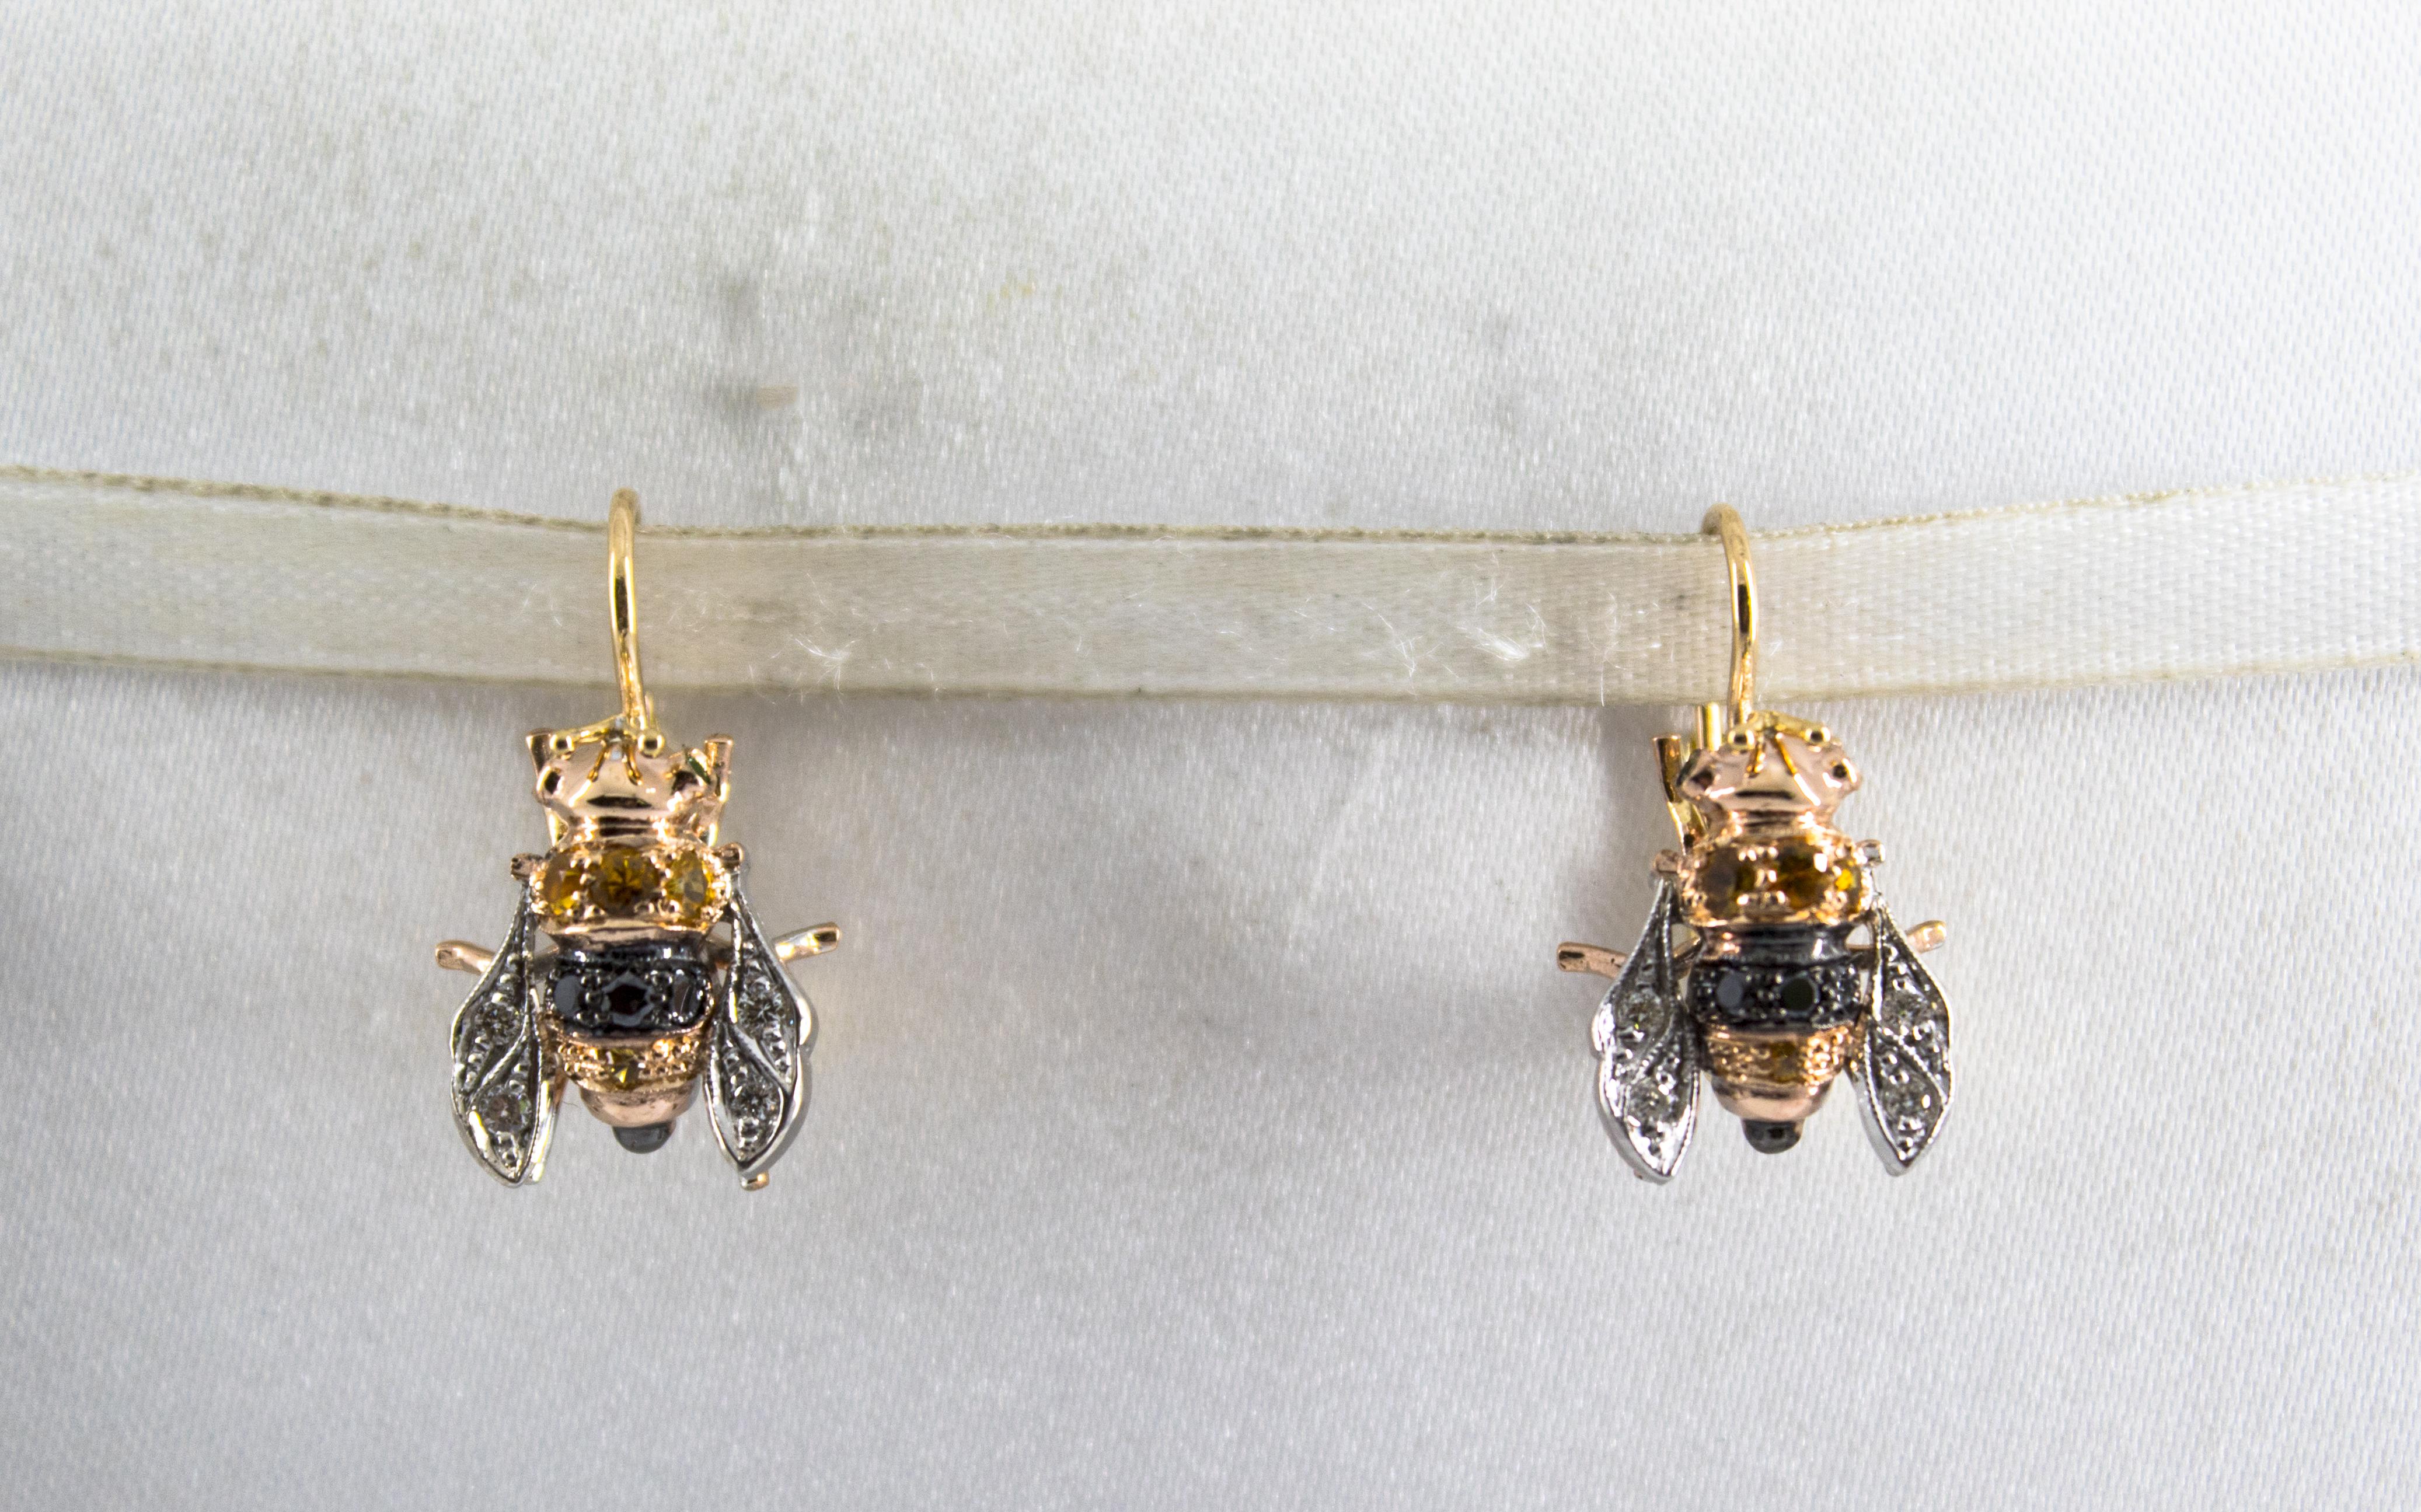 These Earrings are made of 9K Yellow Gold and Sterling Silver.
These Earrings have 0.16 Carats of White Diamonds.
These Earrings have 0.14 Carats of Black Diamonds.
These Earrings have 0.35 Carats of Yellow Sapphires.
All our Earrings have pins for